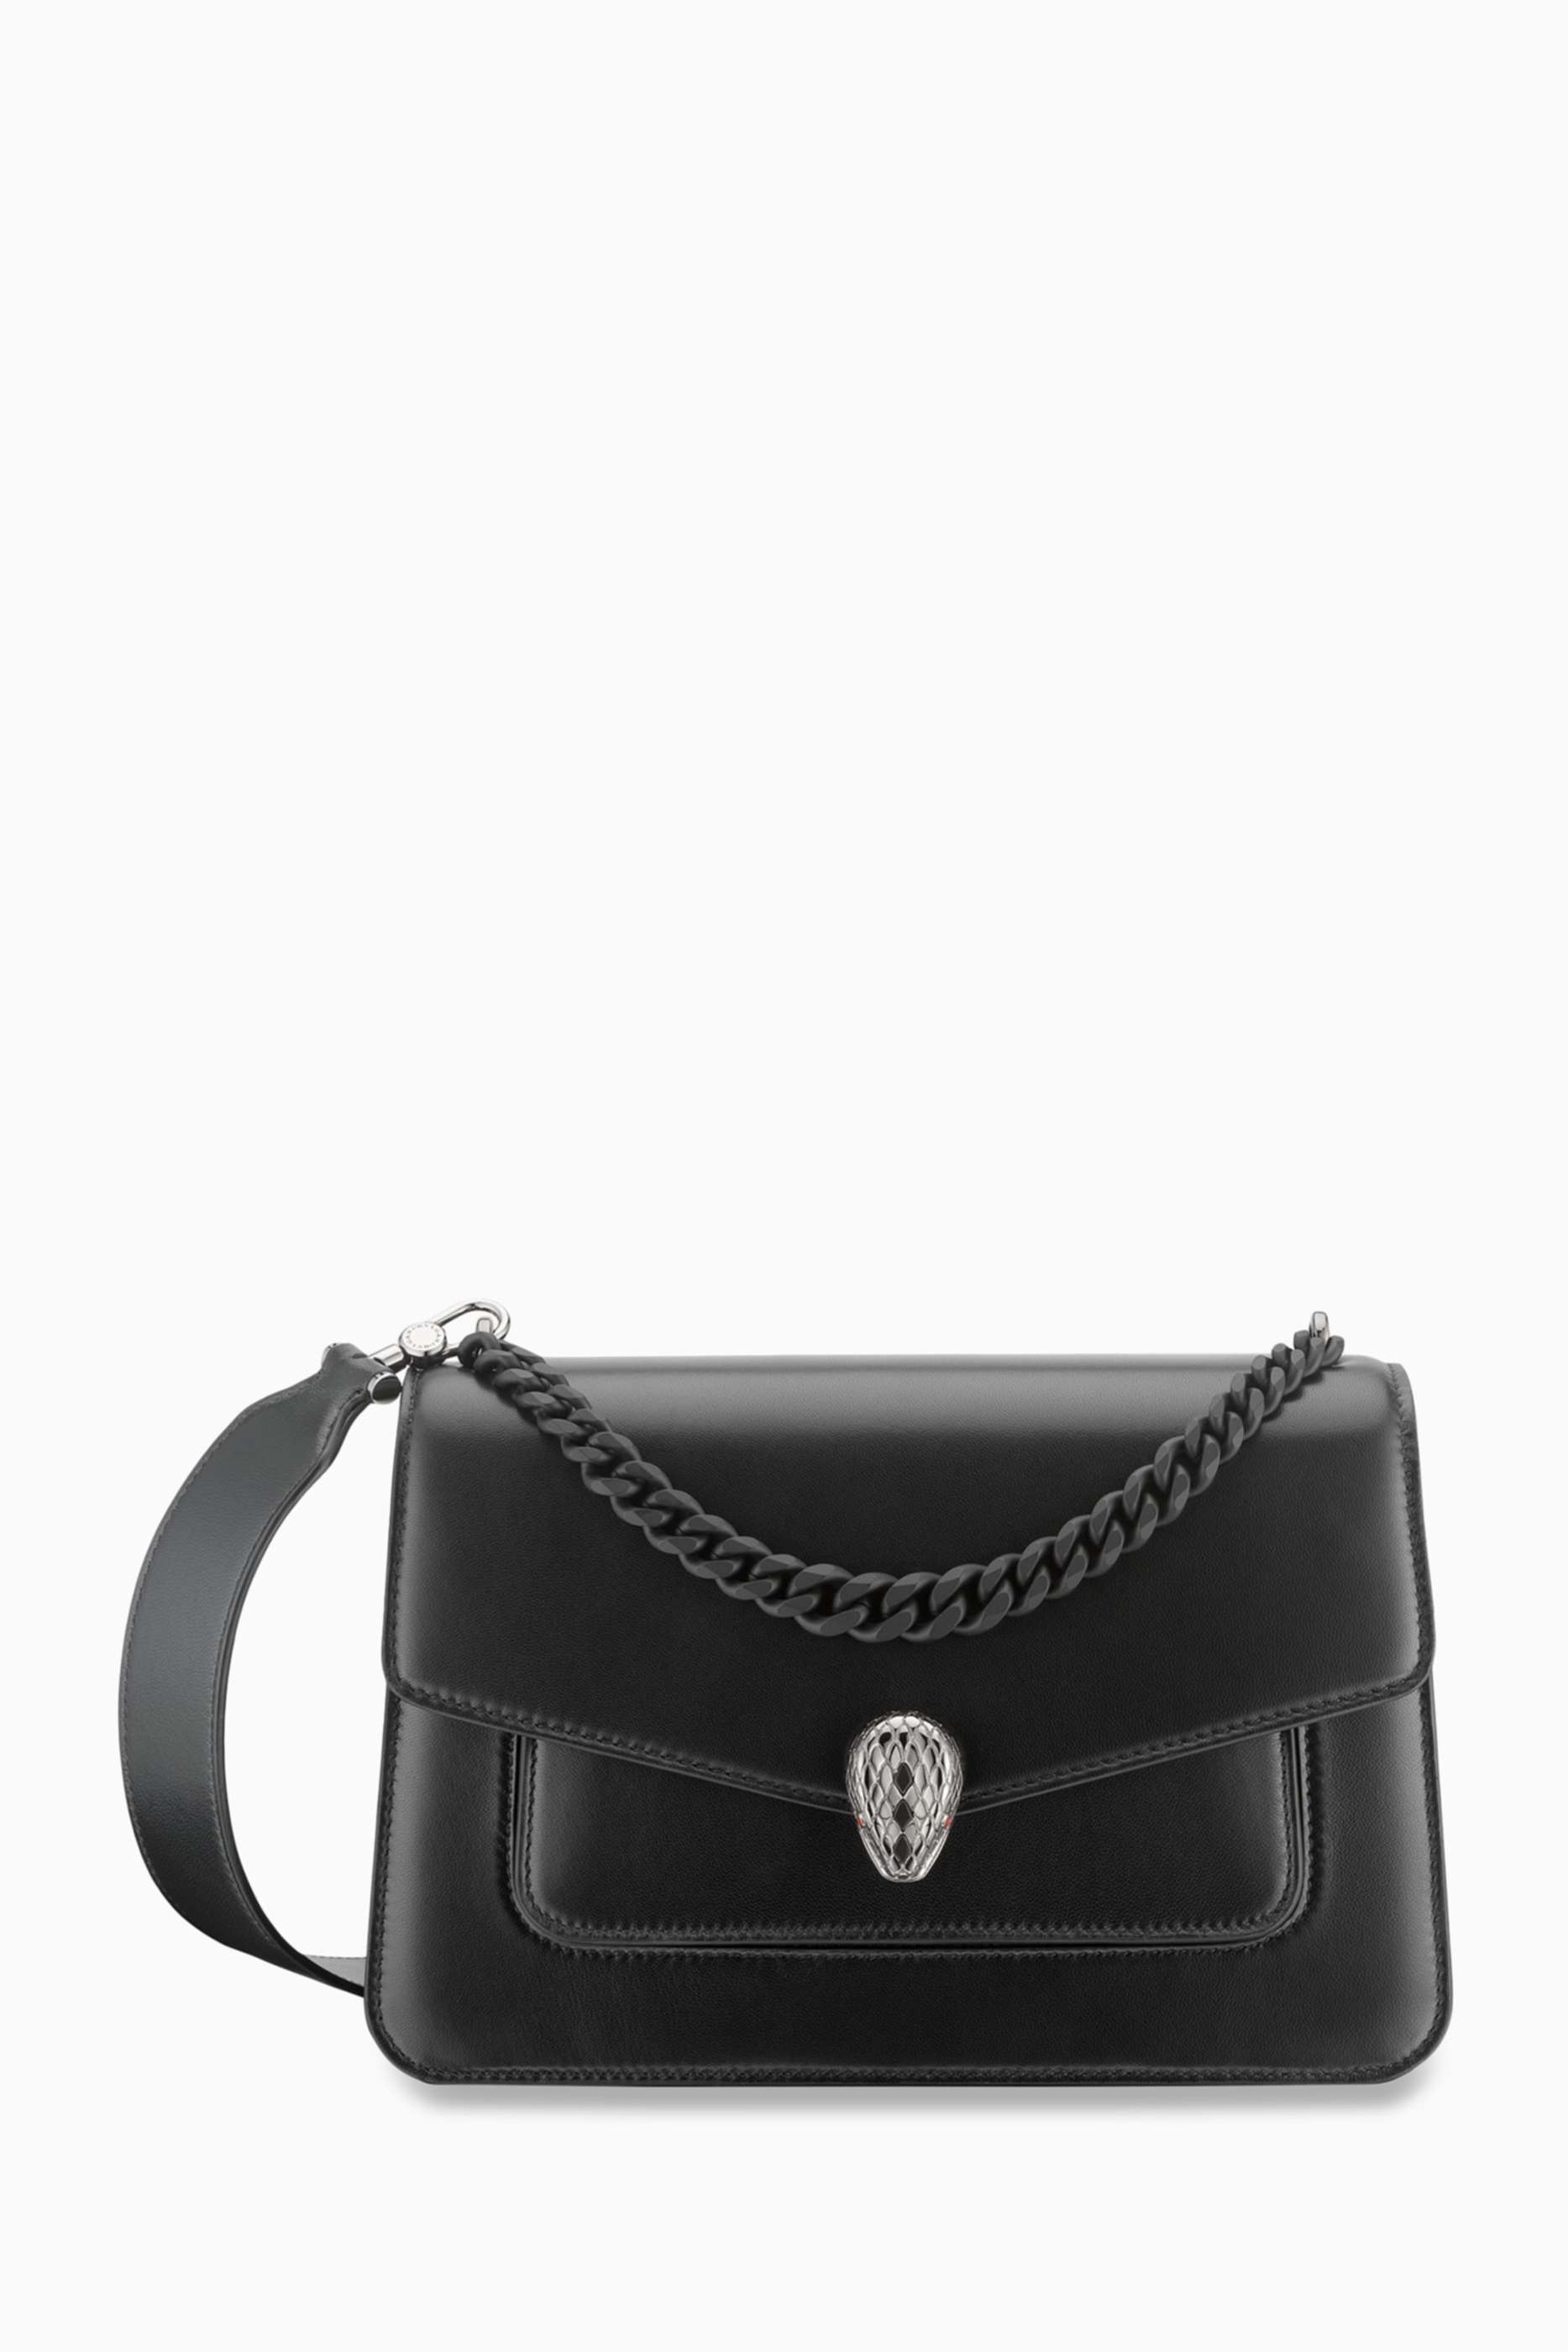 shop-bvlgari-small-serpenti-forever-maxi-chain-crossbody-bag-in-leather-for-women